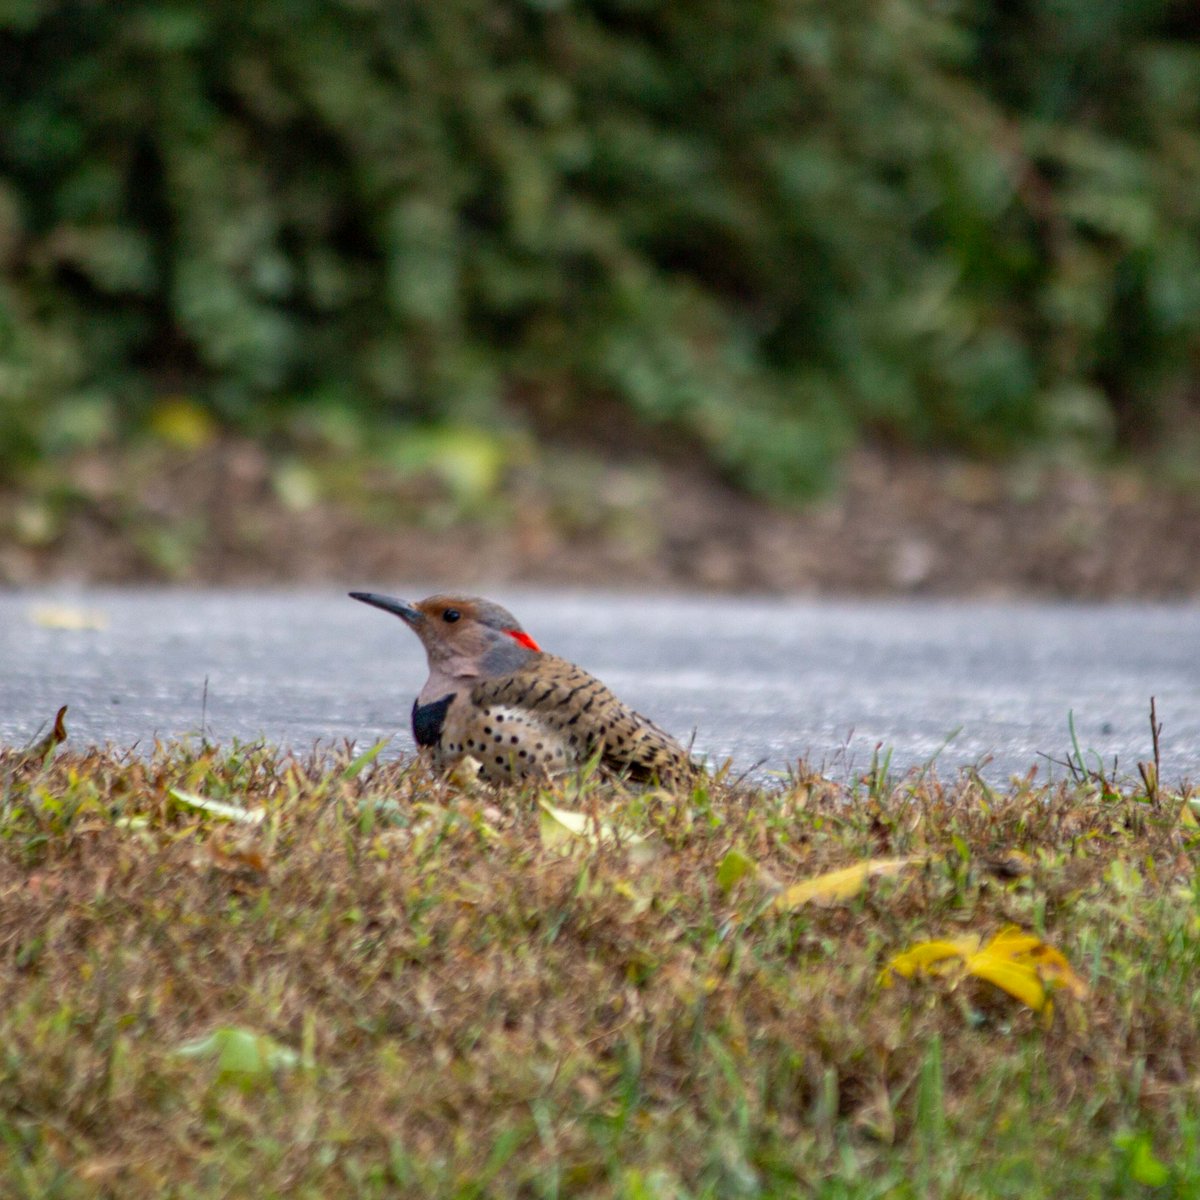 It's #WorldMigratoryDay! On October 15, enjoy a casual birding experience at Wave Hill. Starting with a brief introduction, proceed along to observe birds like this Northern Flicker during fall migration season. Register here: bit.ly/45fhxZI